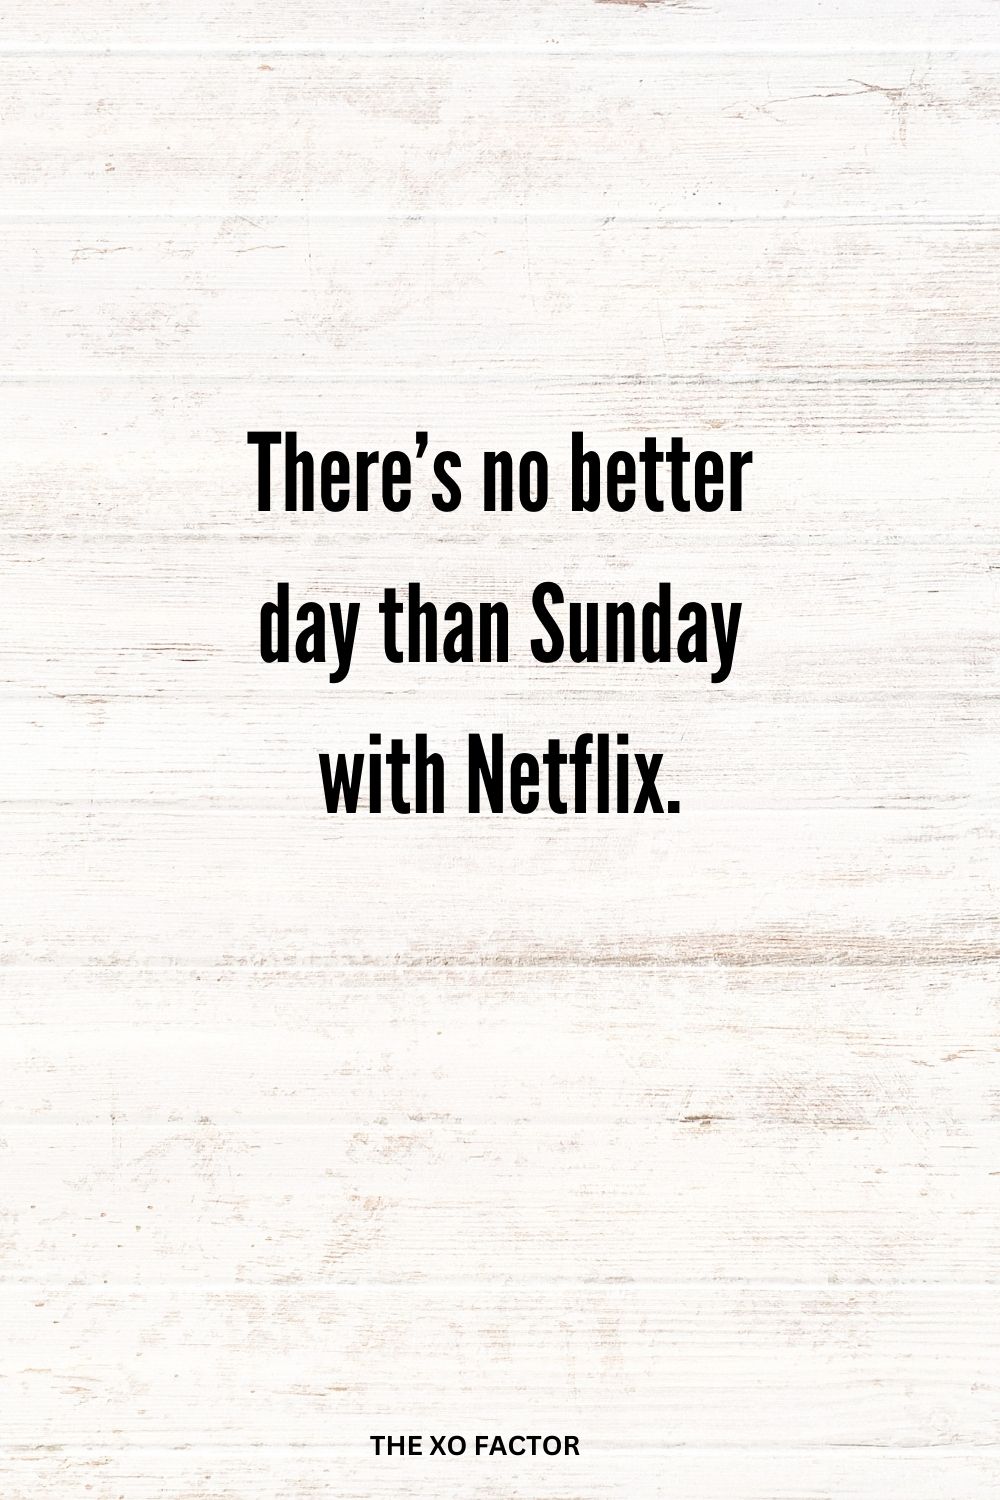 There’s no better day than Sunday with Netflix.